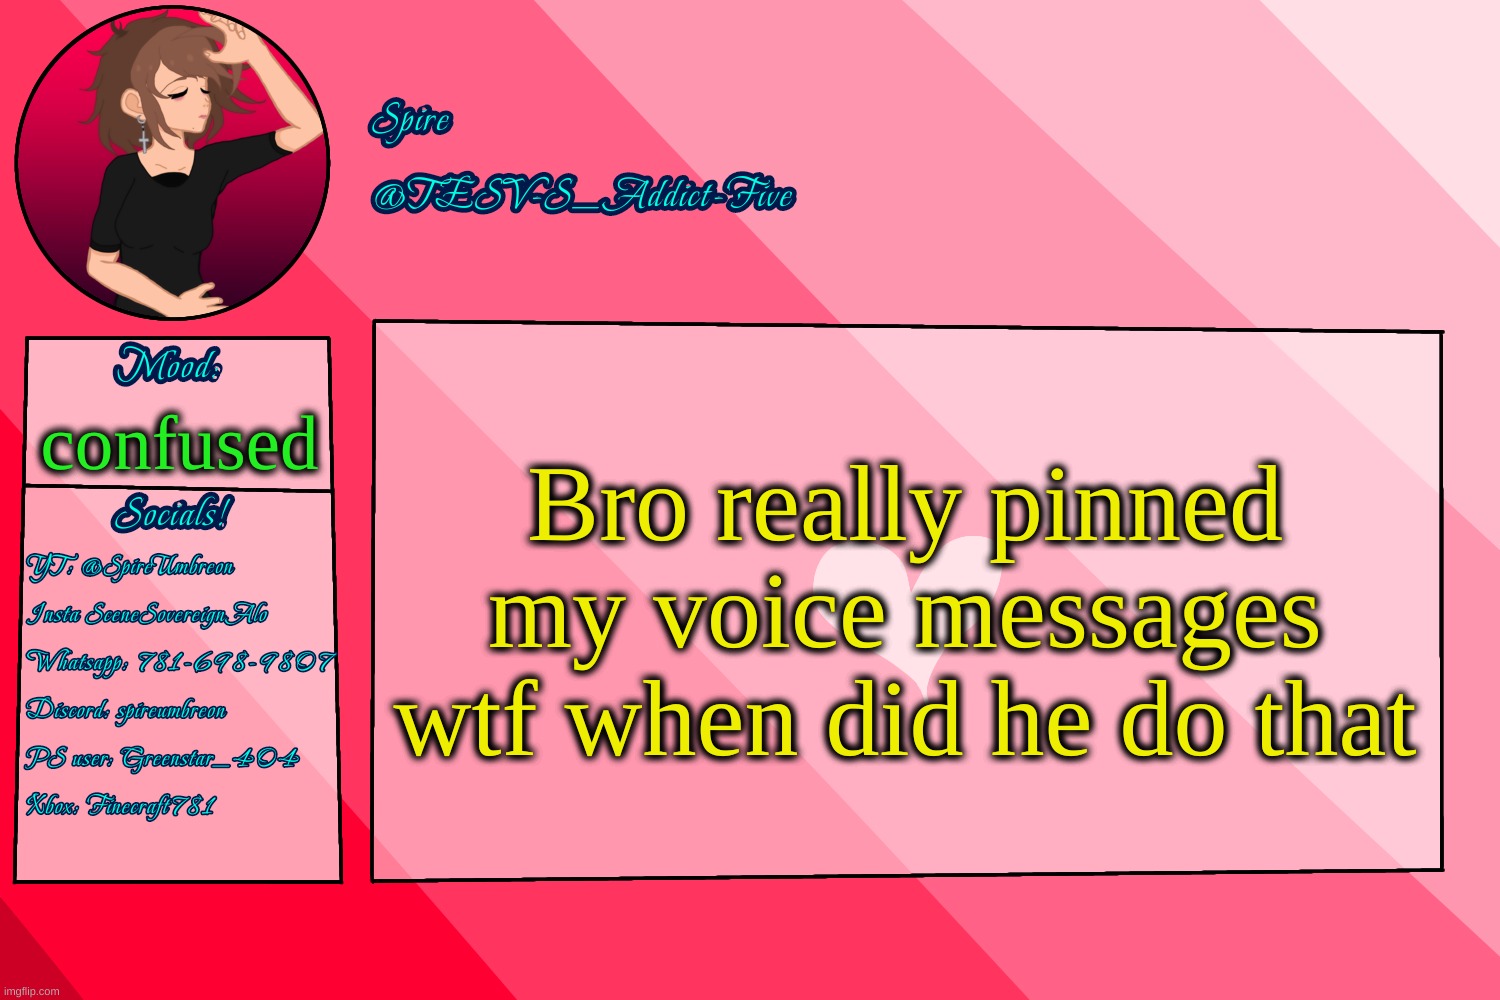 ??? | Bro really pinned my voice messages wtf when did he do that; confused | image tagged in tesv-s_addict-five announcement template | made w/ Imgflip meme maker